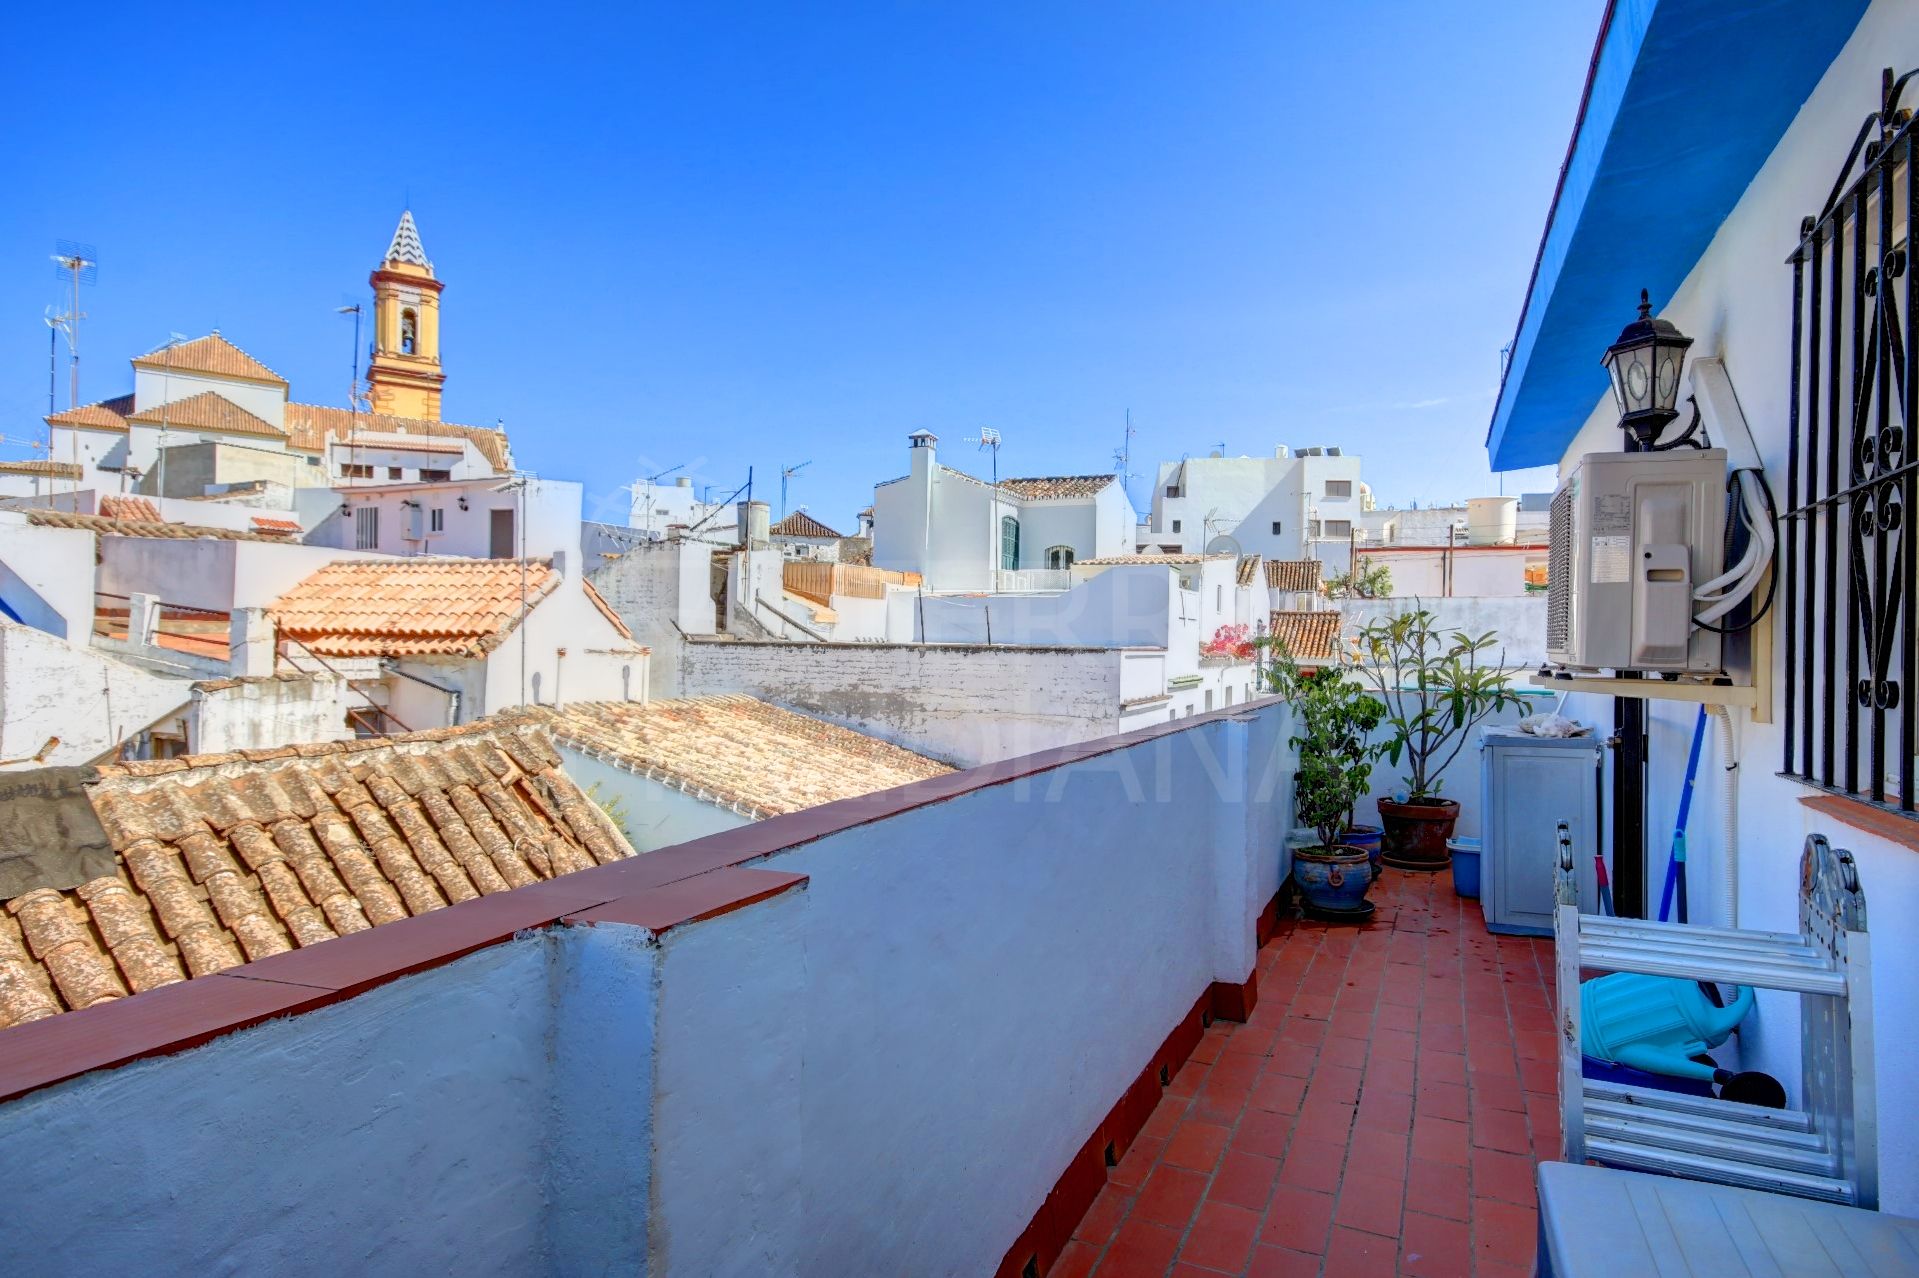 Townhouse for sale in great condition in the heart of the old town of Estepona